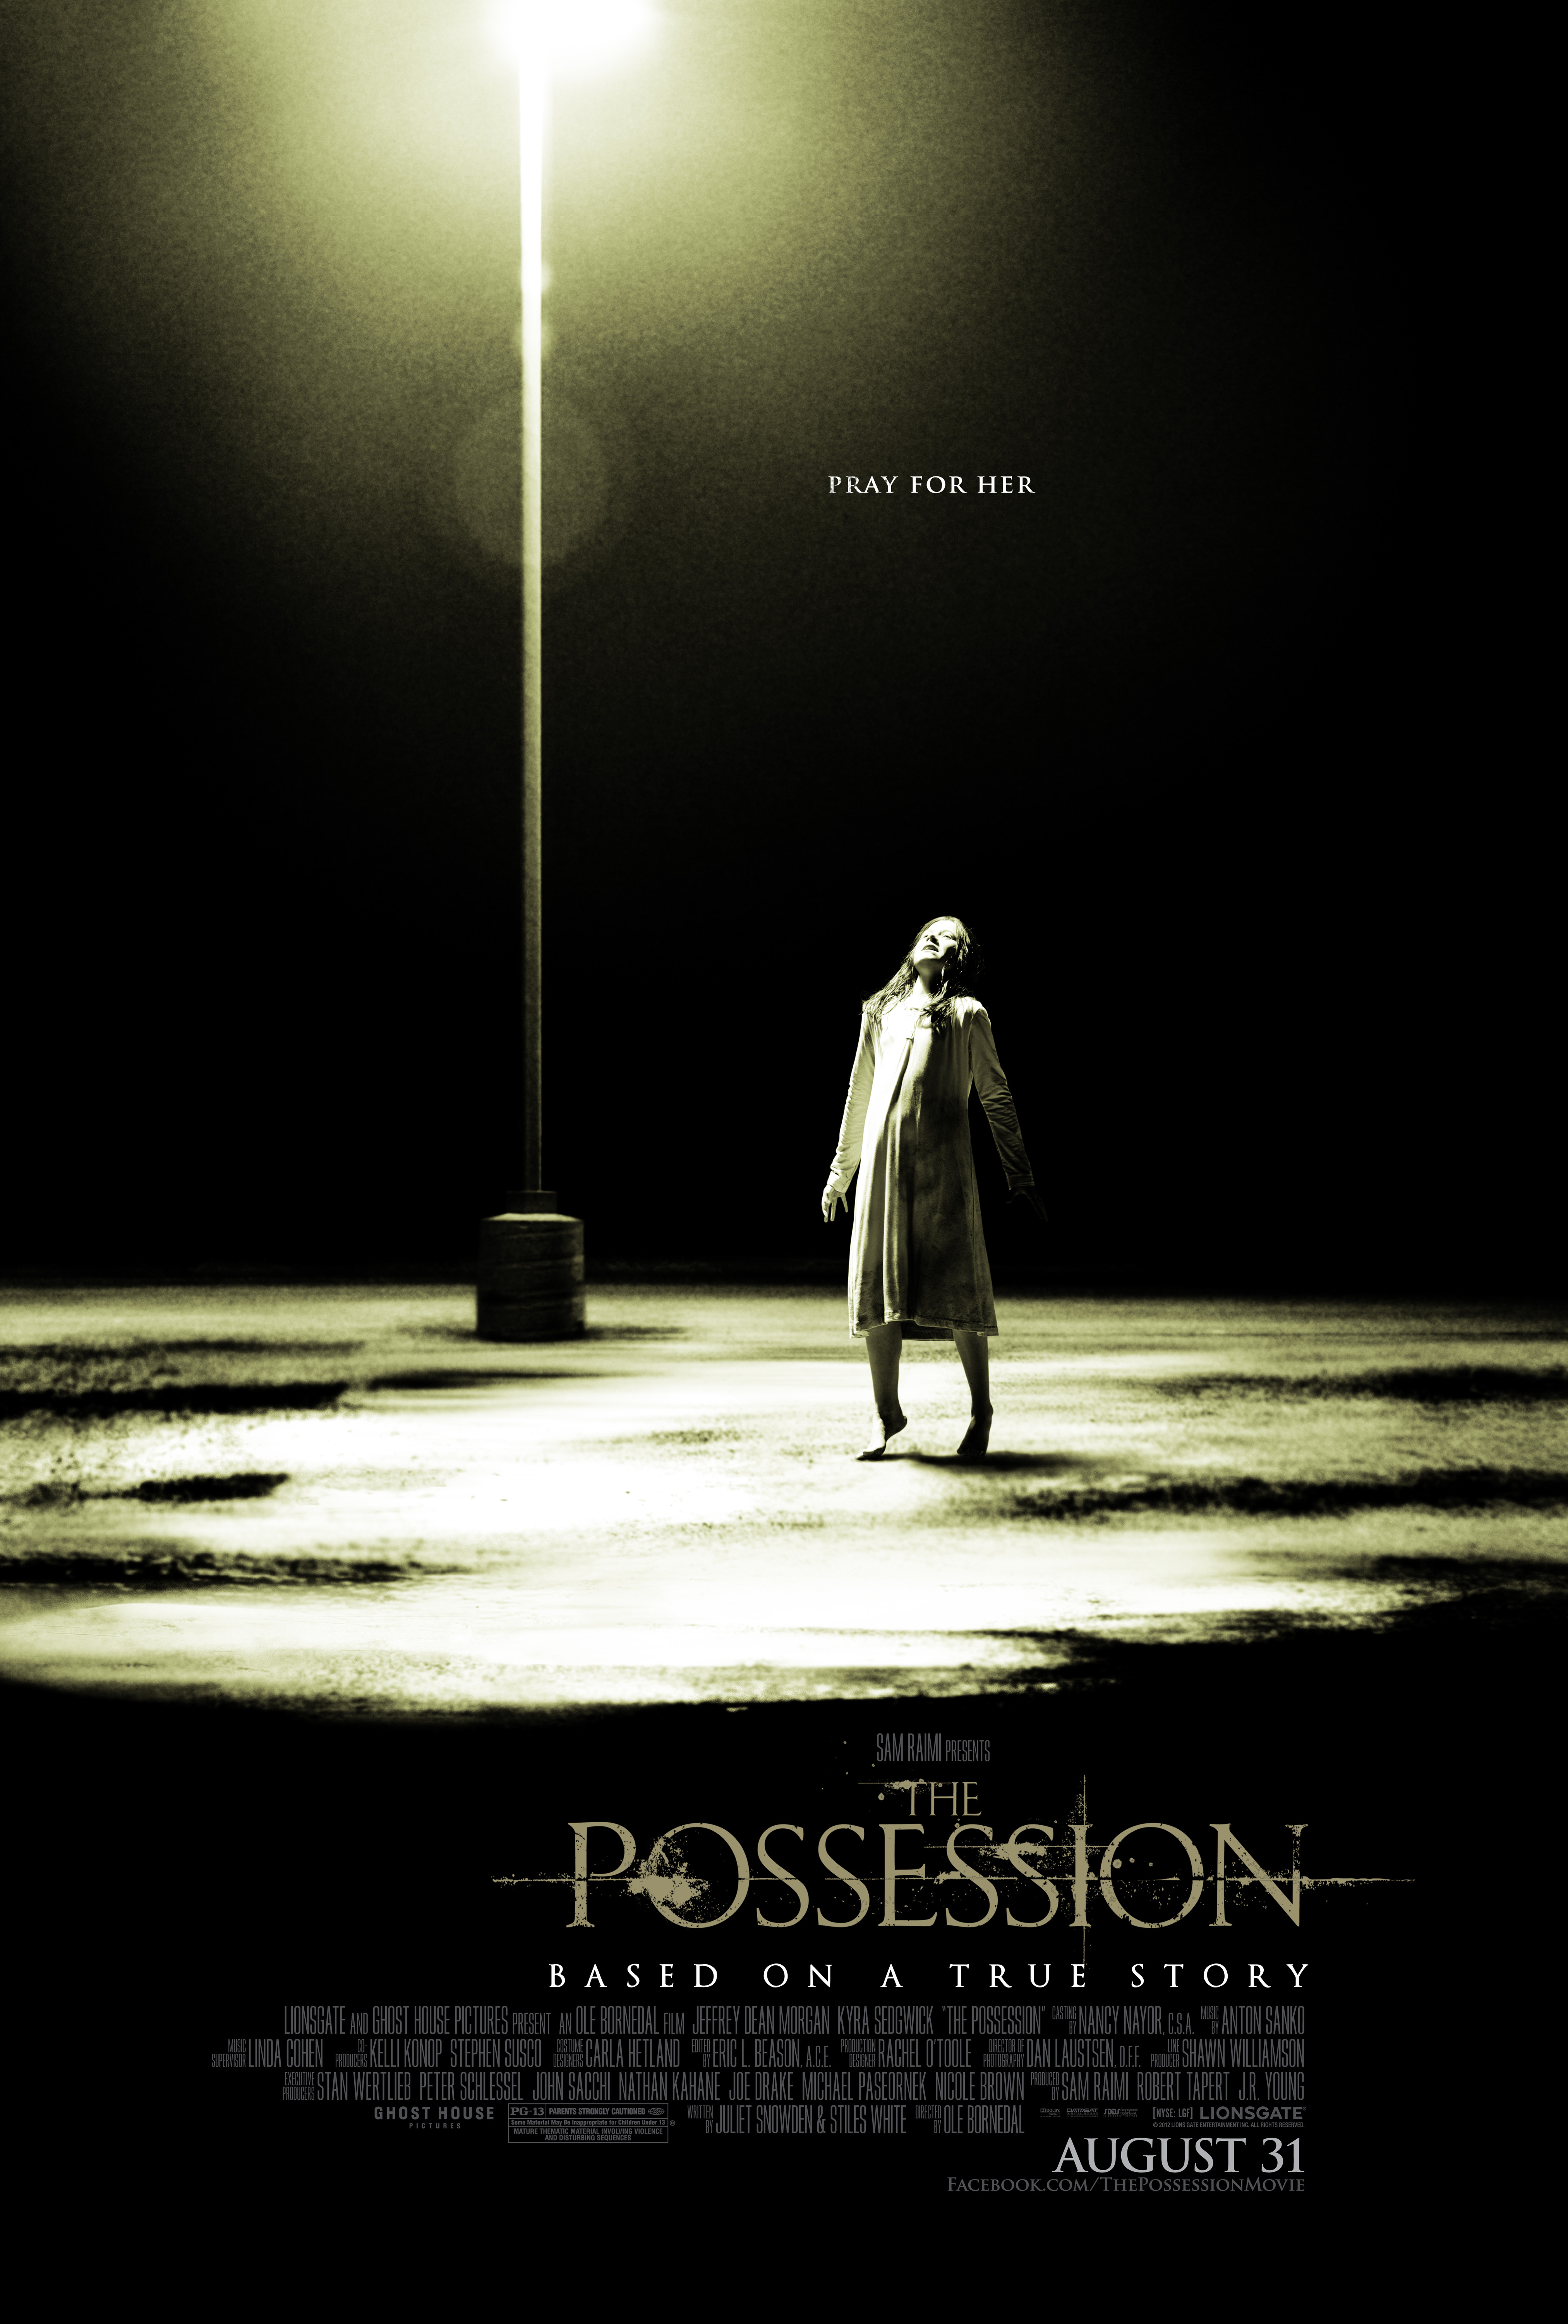 New Poster for The Possession